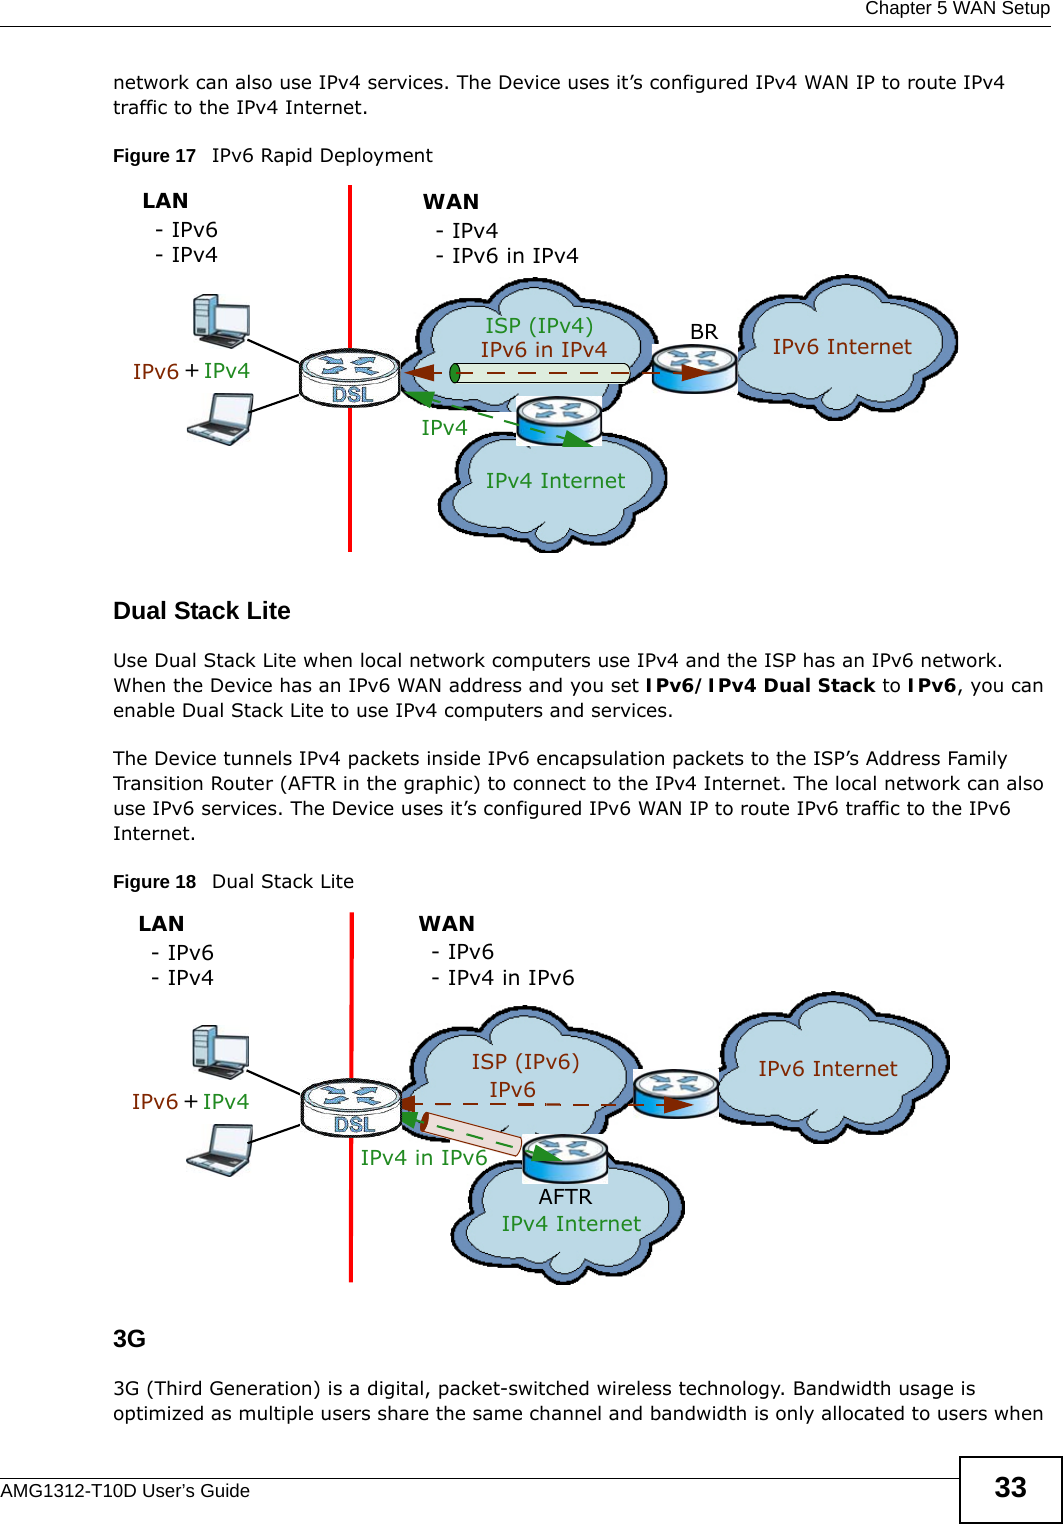  Chapter 5 WAN SetupAMG1312-T10D User’s Guide 33network can also use IPv4 services. The Device uses it’s configured IPv4 WAN IP to route IPv4 traffic to the IPv4 Internet.Figure 17   IPv6 Rapid DeploymentDual Stack Lite   Use Dual Stack Lite when local network computers use IPv4 and the ISP has an IPv6 network. When the Device has an IPv6 WAN address and you set IPv6/IPv4 Dual Stack to IPv6, you can enable Dual Stack Lite to use IPv4 computers and services. The Device tunnels IPv4 packets inside IPv6 encapsulation packets to the ISP’s Address Family Transition Router (AFTR in the graphic) to connect to the IPv4 Internet. The local network can also use IPv6 services. The Device uses it’s configured IPv6 WAN IP to route IPv6 traffic to the IPv6 Internet.Figure 18   Dual Stack Lite3G 3G (Third Generation) is a digital, packet-switched wireless technology. Bandwidth usage is optimized as multiple users share the same channel and bandwidth is only allocated to users when ISP (IPv4) IPv6 Internet IPv4 IPv6 BRIPv6 in IPv4IPv4 InternetIPv4 +LAN- IPv6- IPv4WAN- IPv4- IPv6 in IPv4ISP (IPv6) IPv6 Internet IPv6 AFTRIPv4 in IPv6IPv4 InternetIPv6  IPv4 +LAN- IPv6- IPv4WAN- IPv6- IPv4 in IPv6